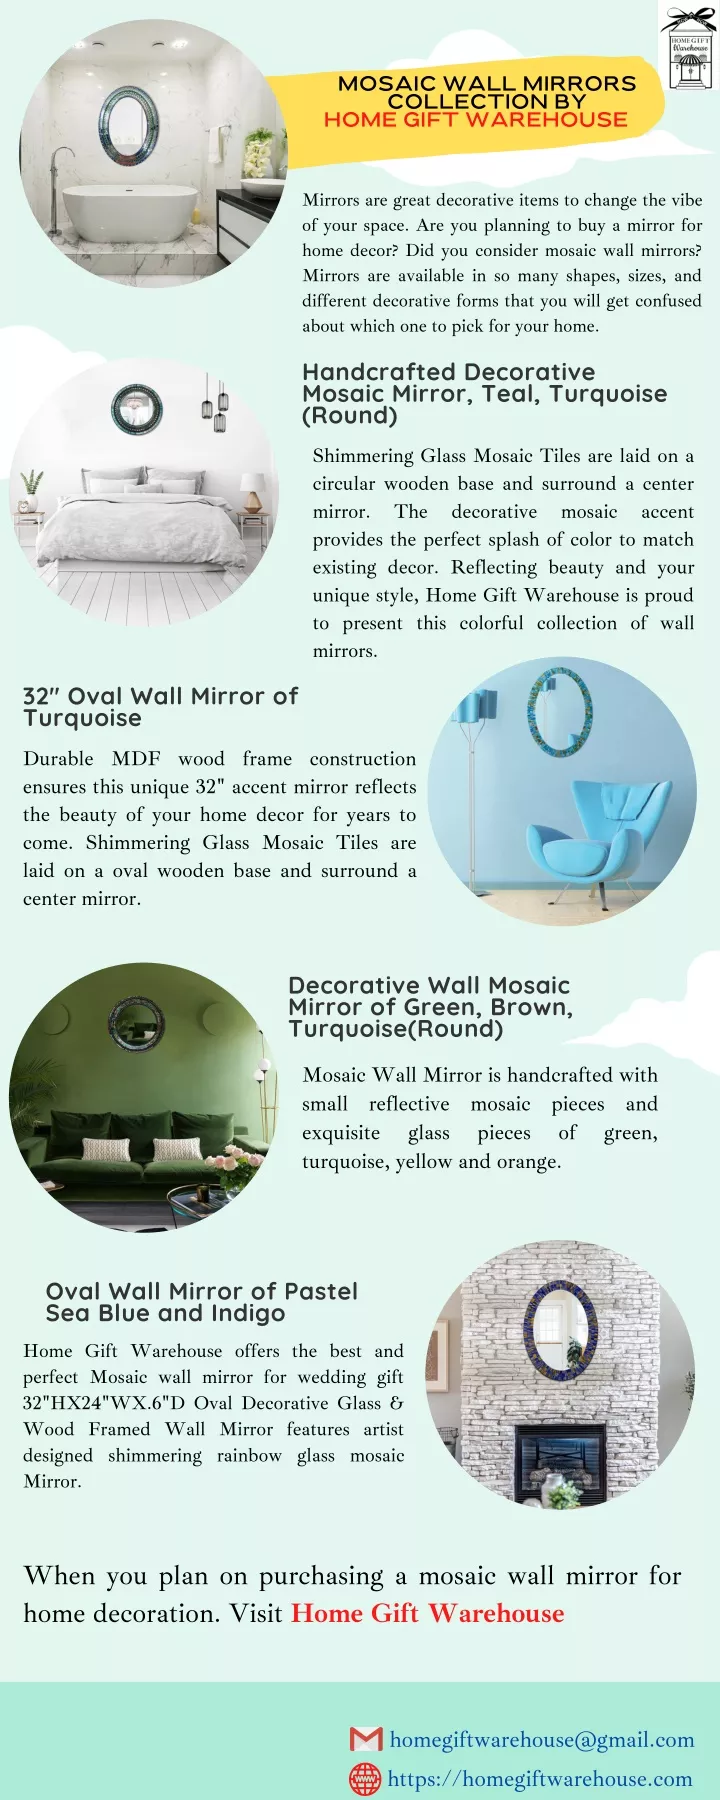 mosaic wall mirrors collection by home gift